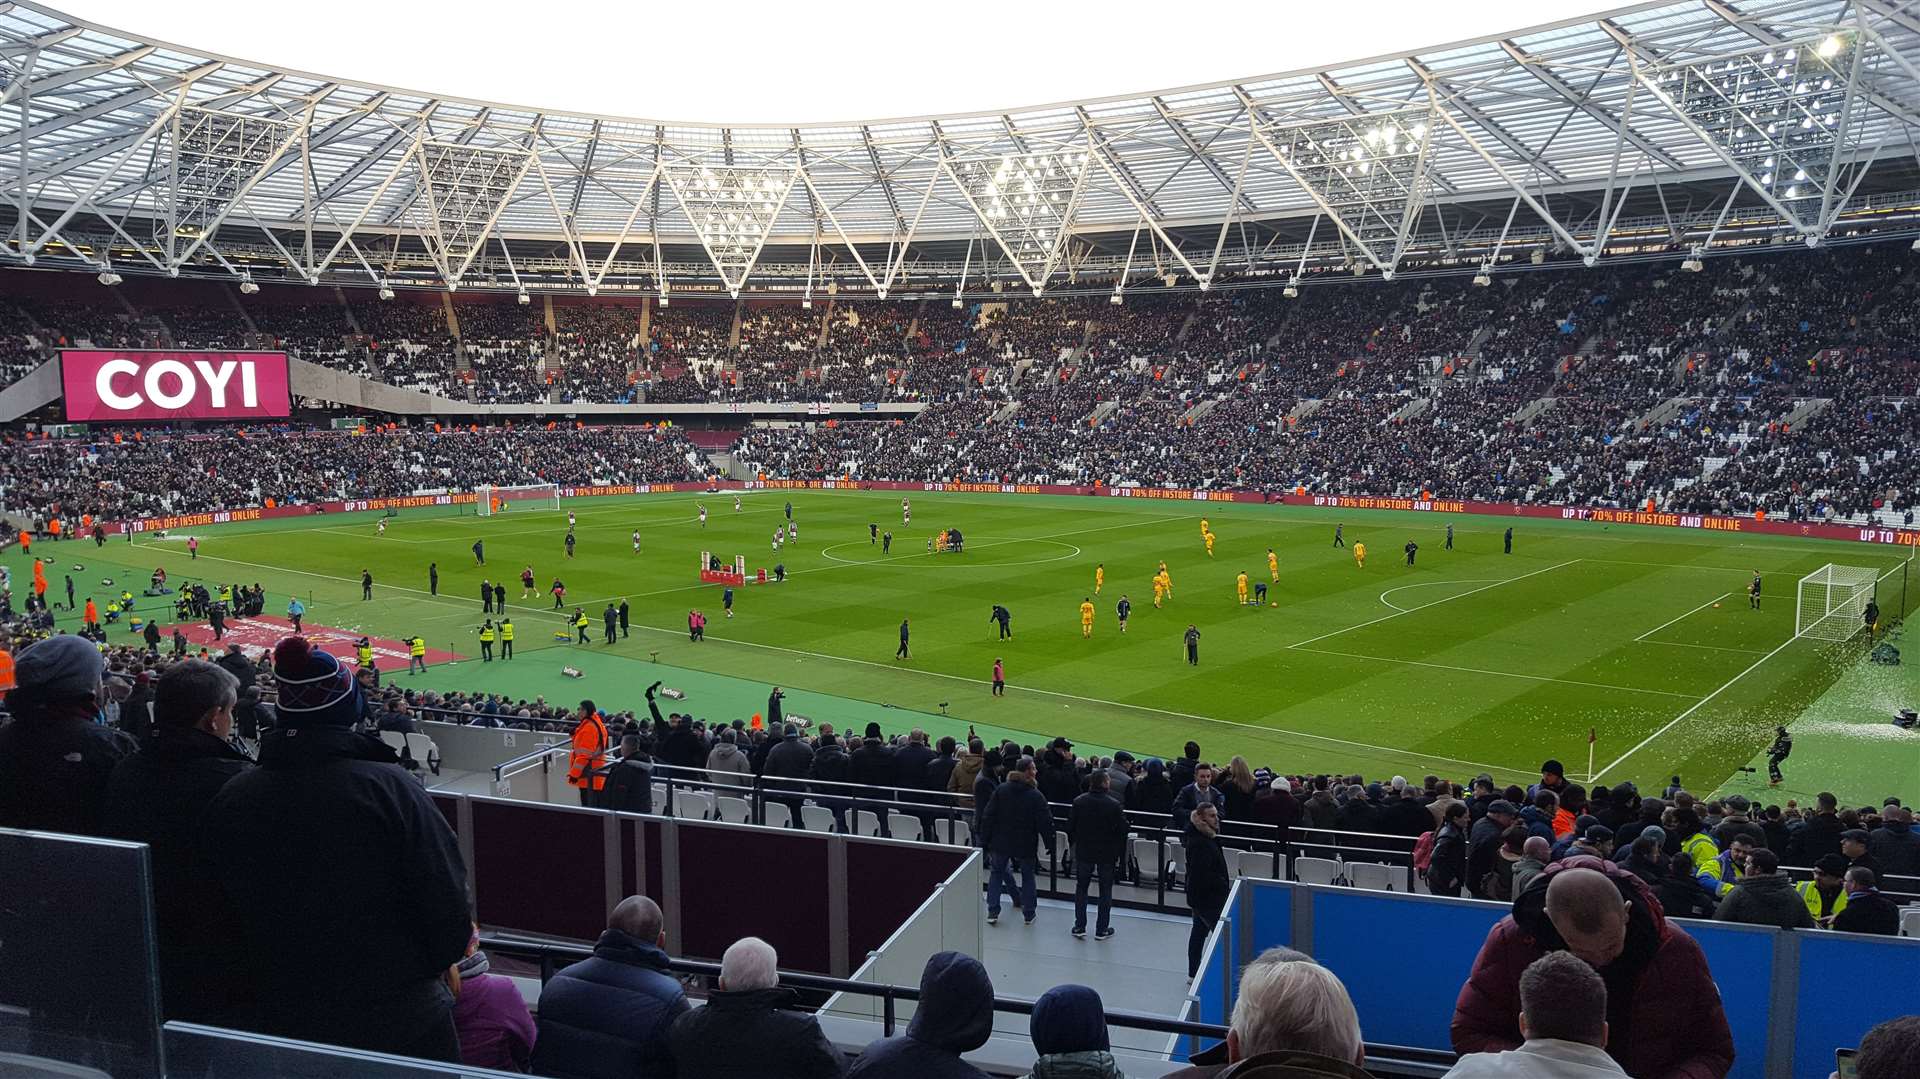 You could watch West Ham take on Chelsea at the Olympic Stadium